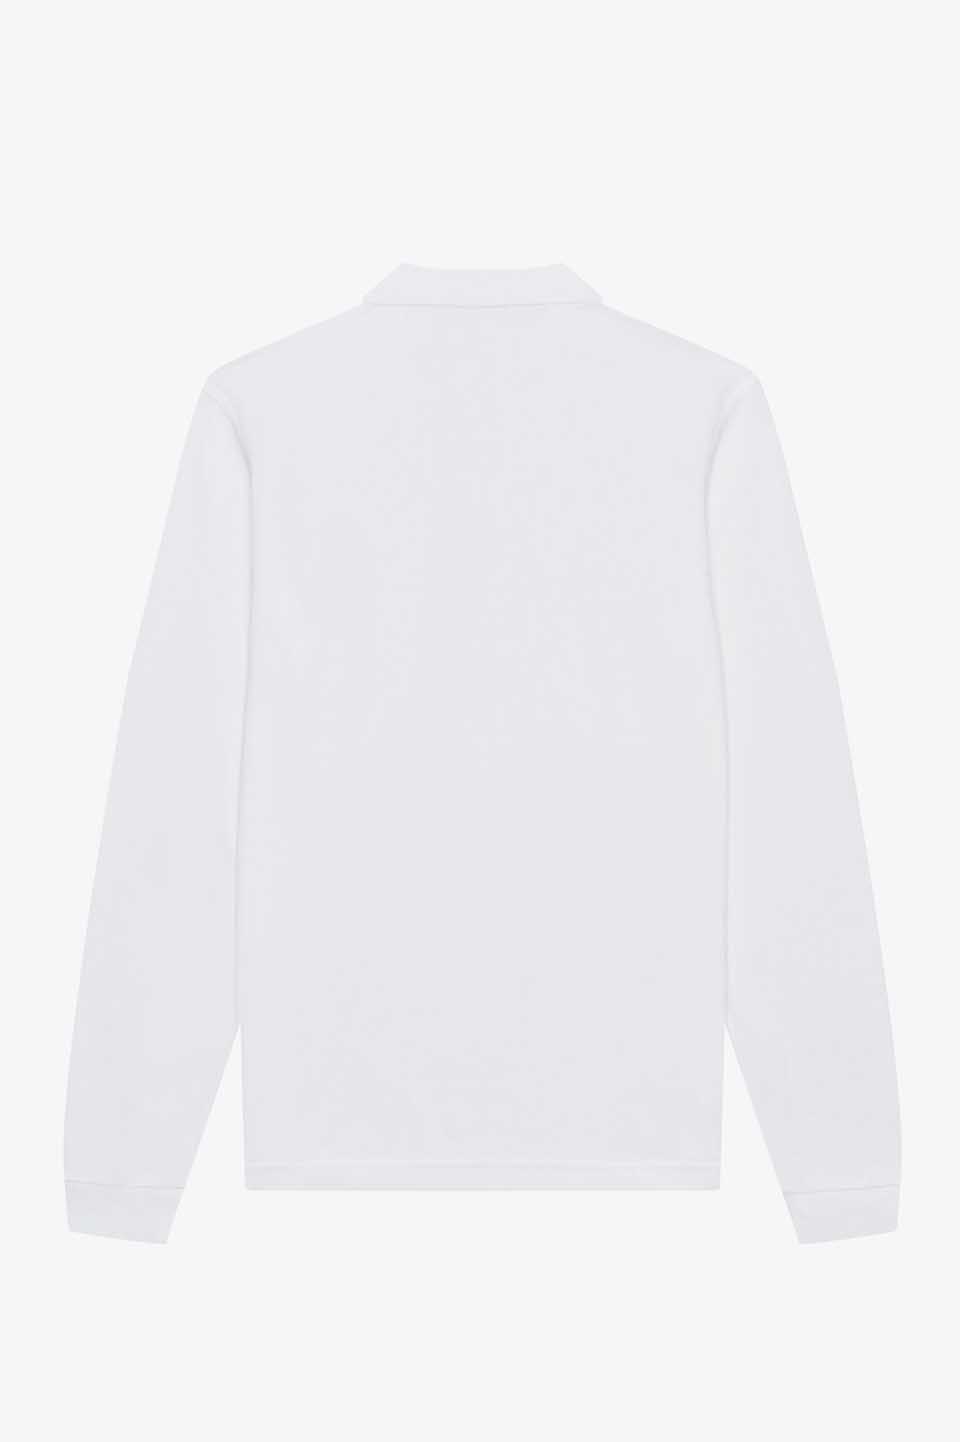 The Fred Perry Shirt - M6006(S 100：WHITE): | FRED PERRY JAPAN | フレッドペリー ...